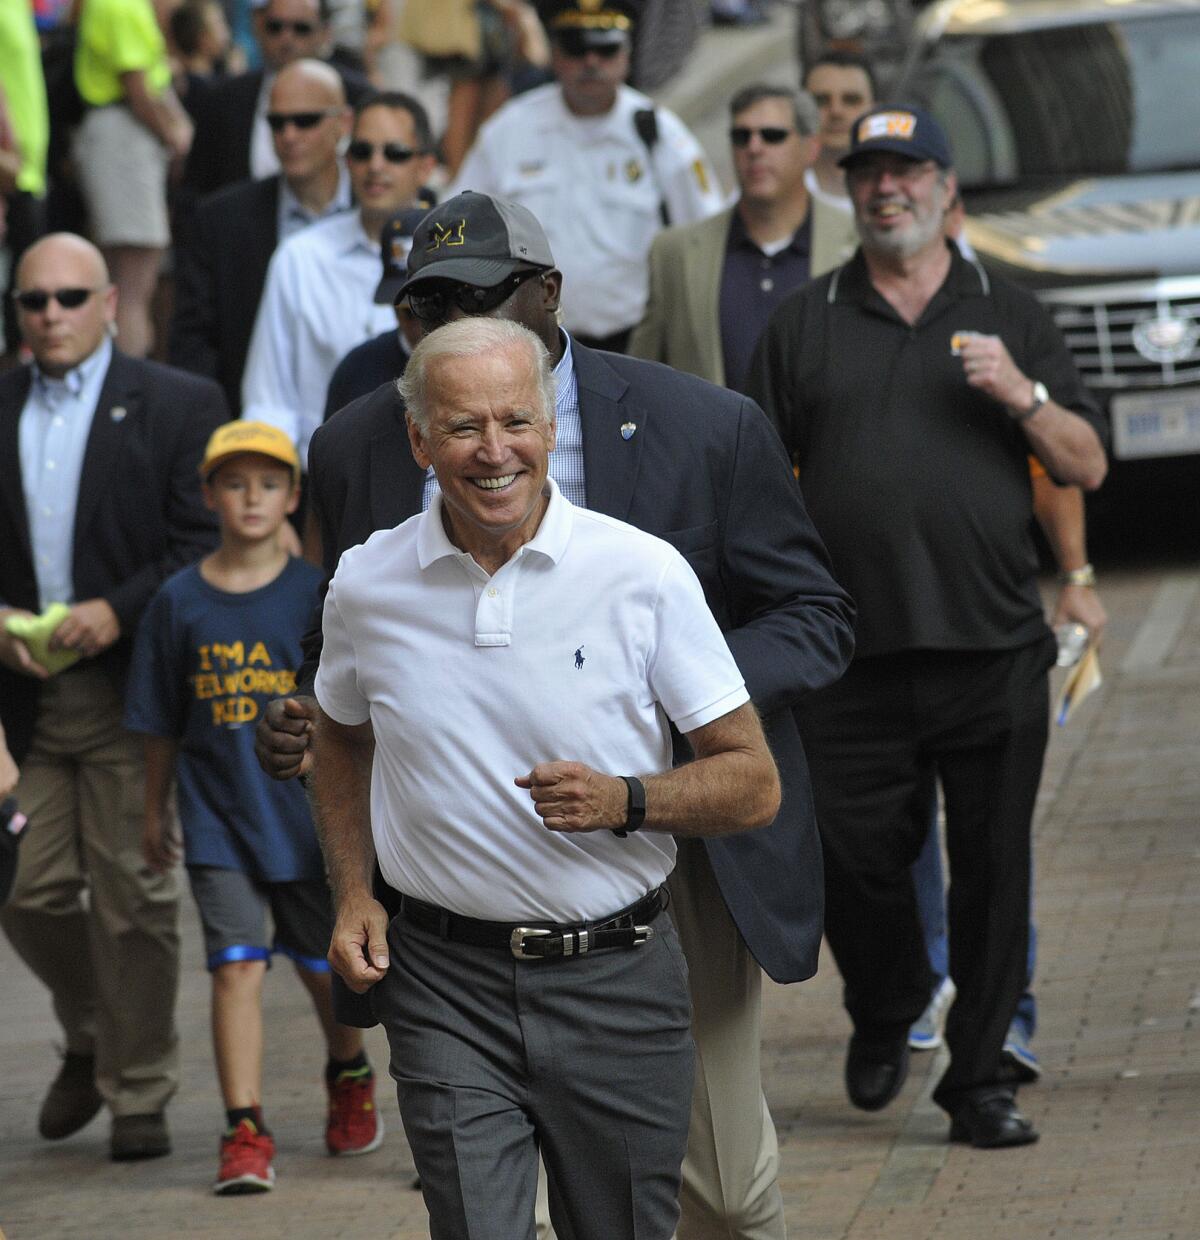 Vice President Joe Biden greets people as he walks along the Labor Day parade route in Pittsburgh.